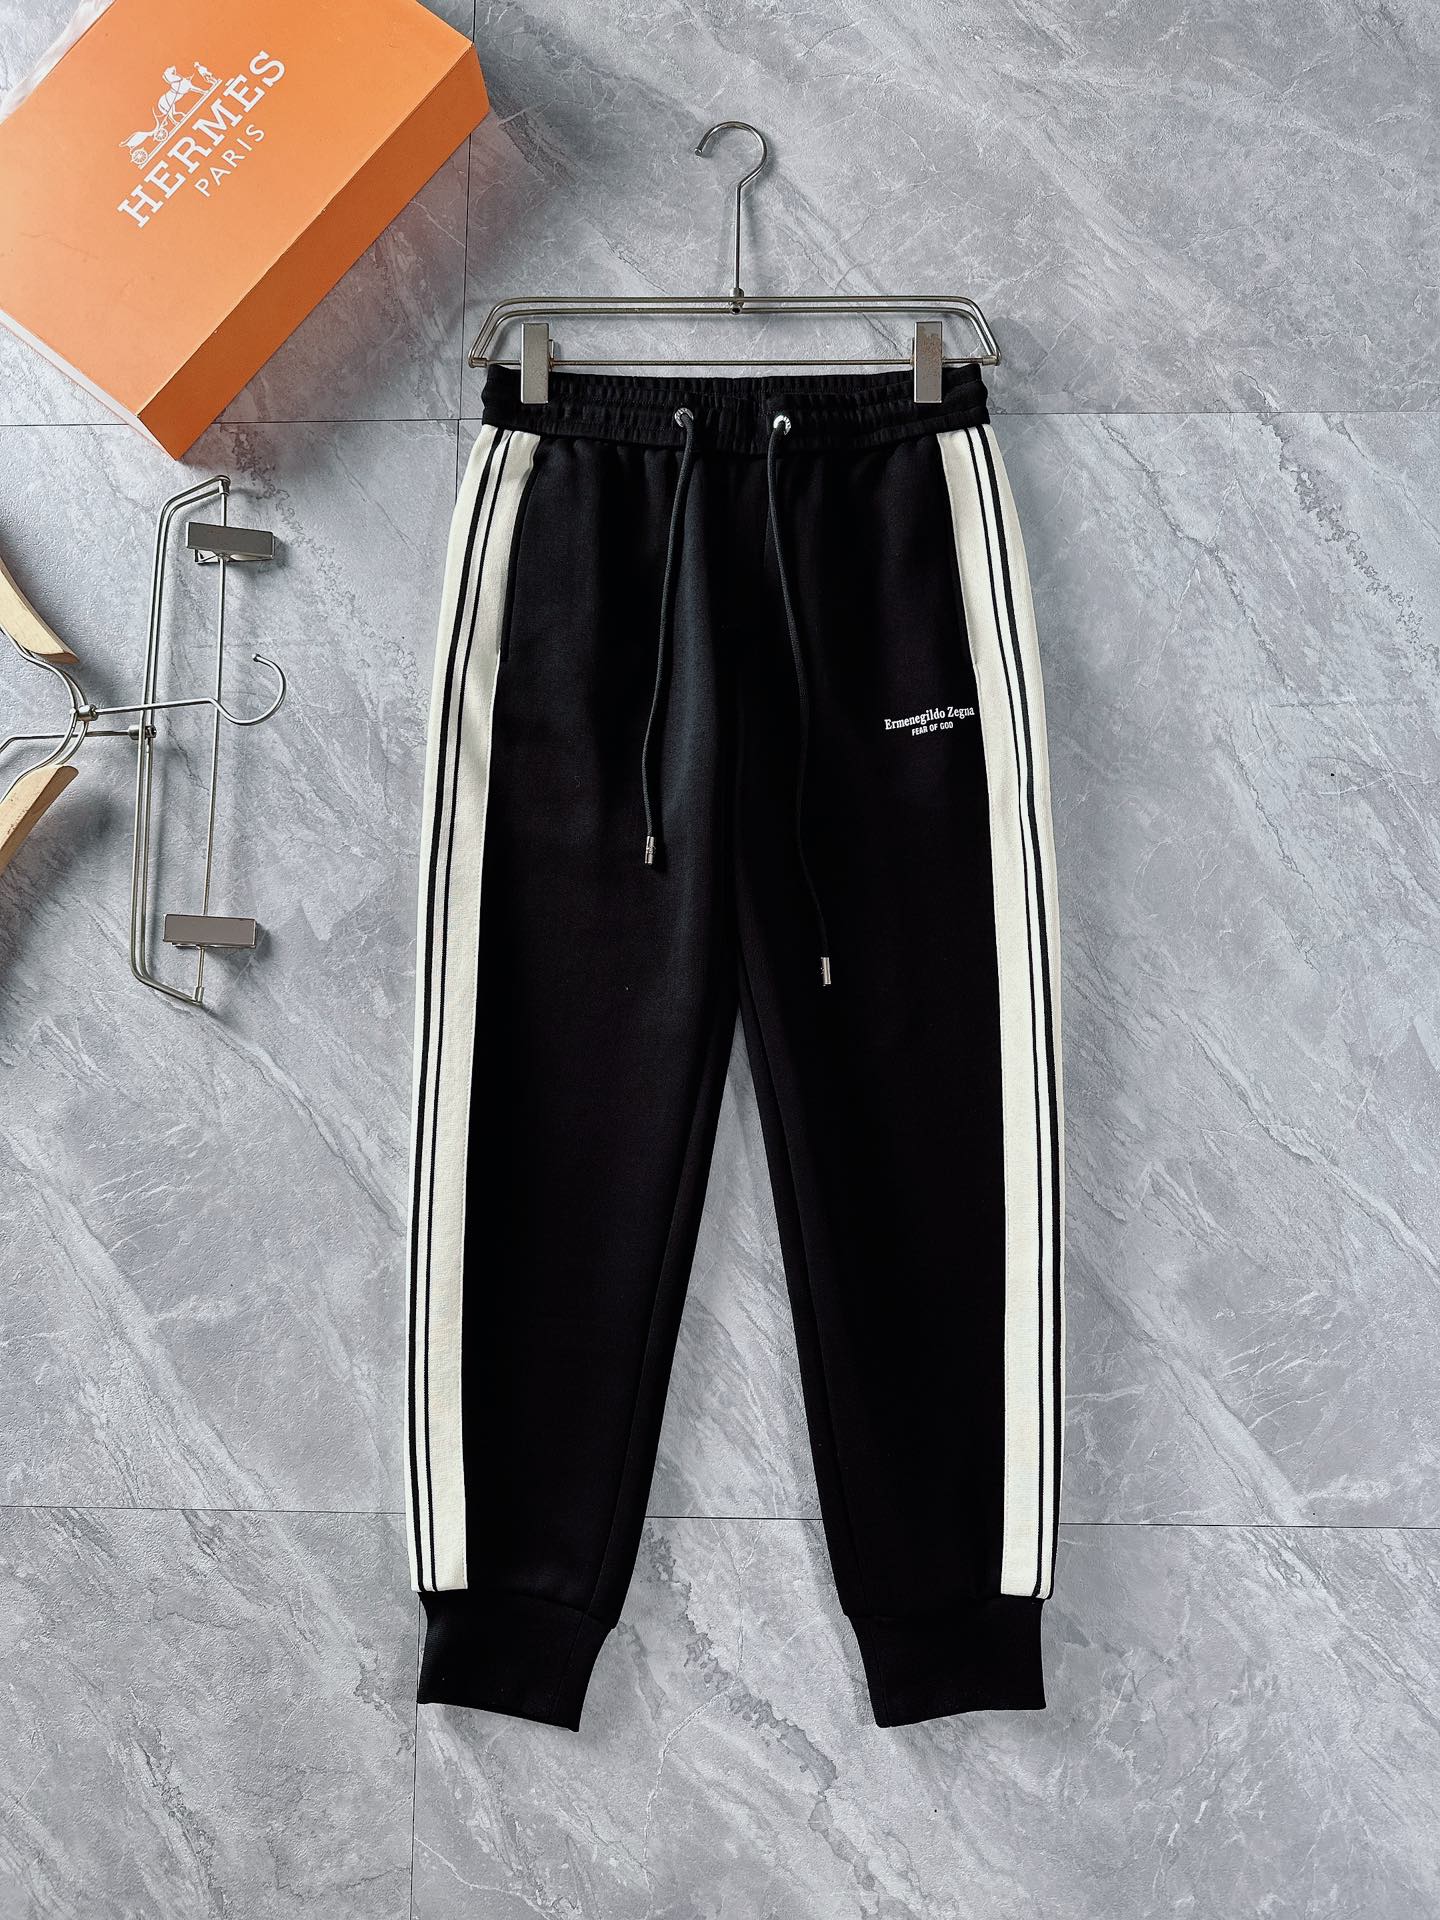 Zegna Clothing Pants & Trousers Fall/Winter Collection Casual